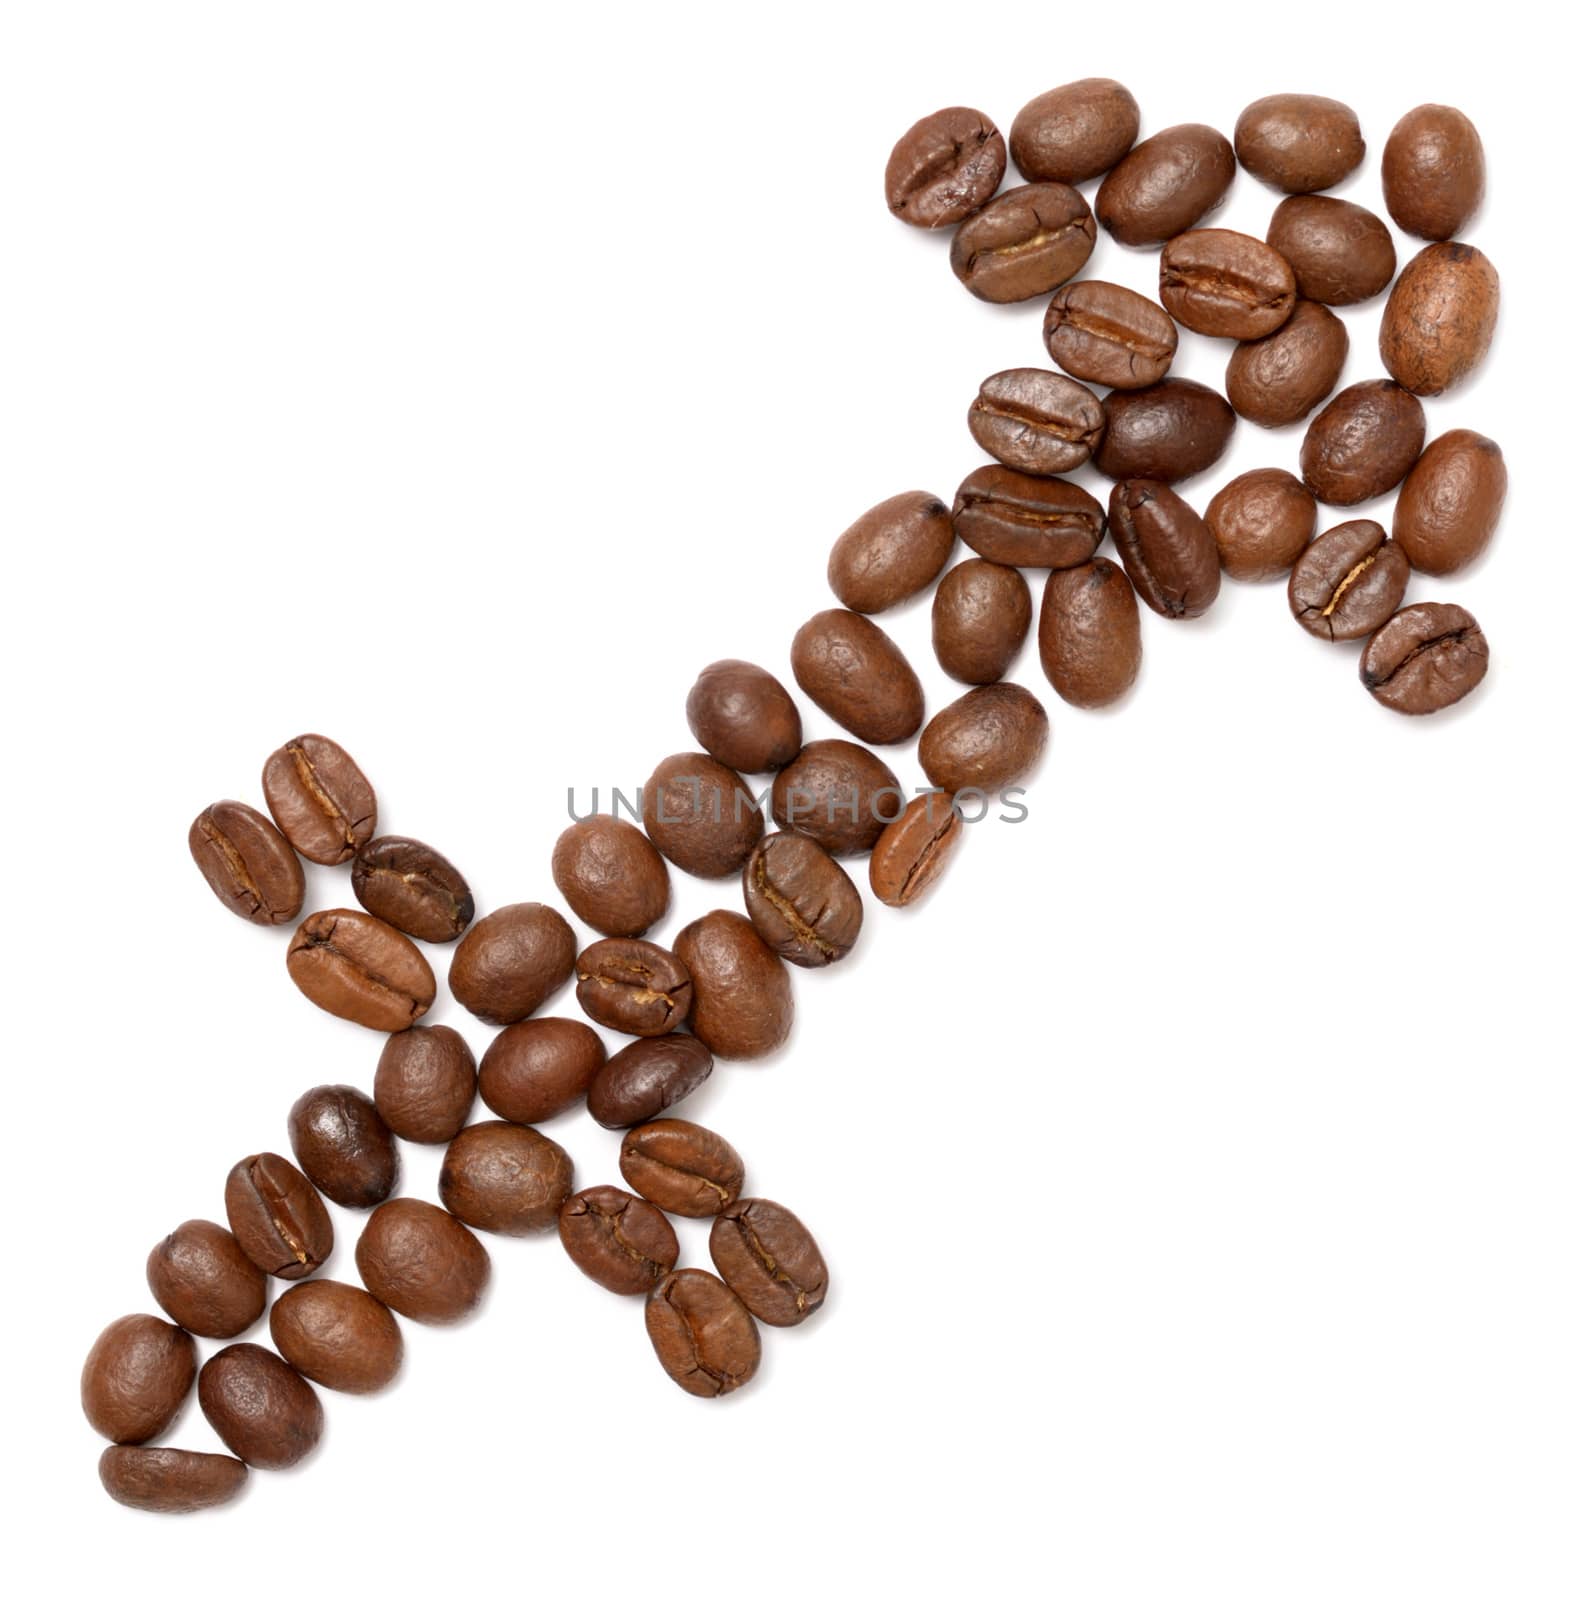 sagittarius (zodiac sign) of coffee beans isolated on white